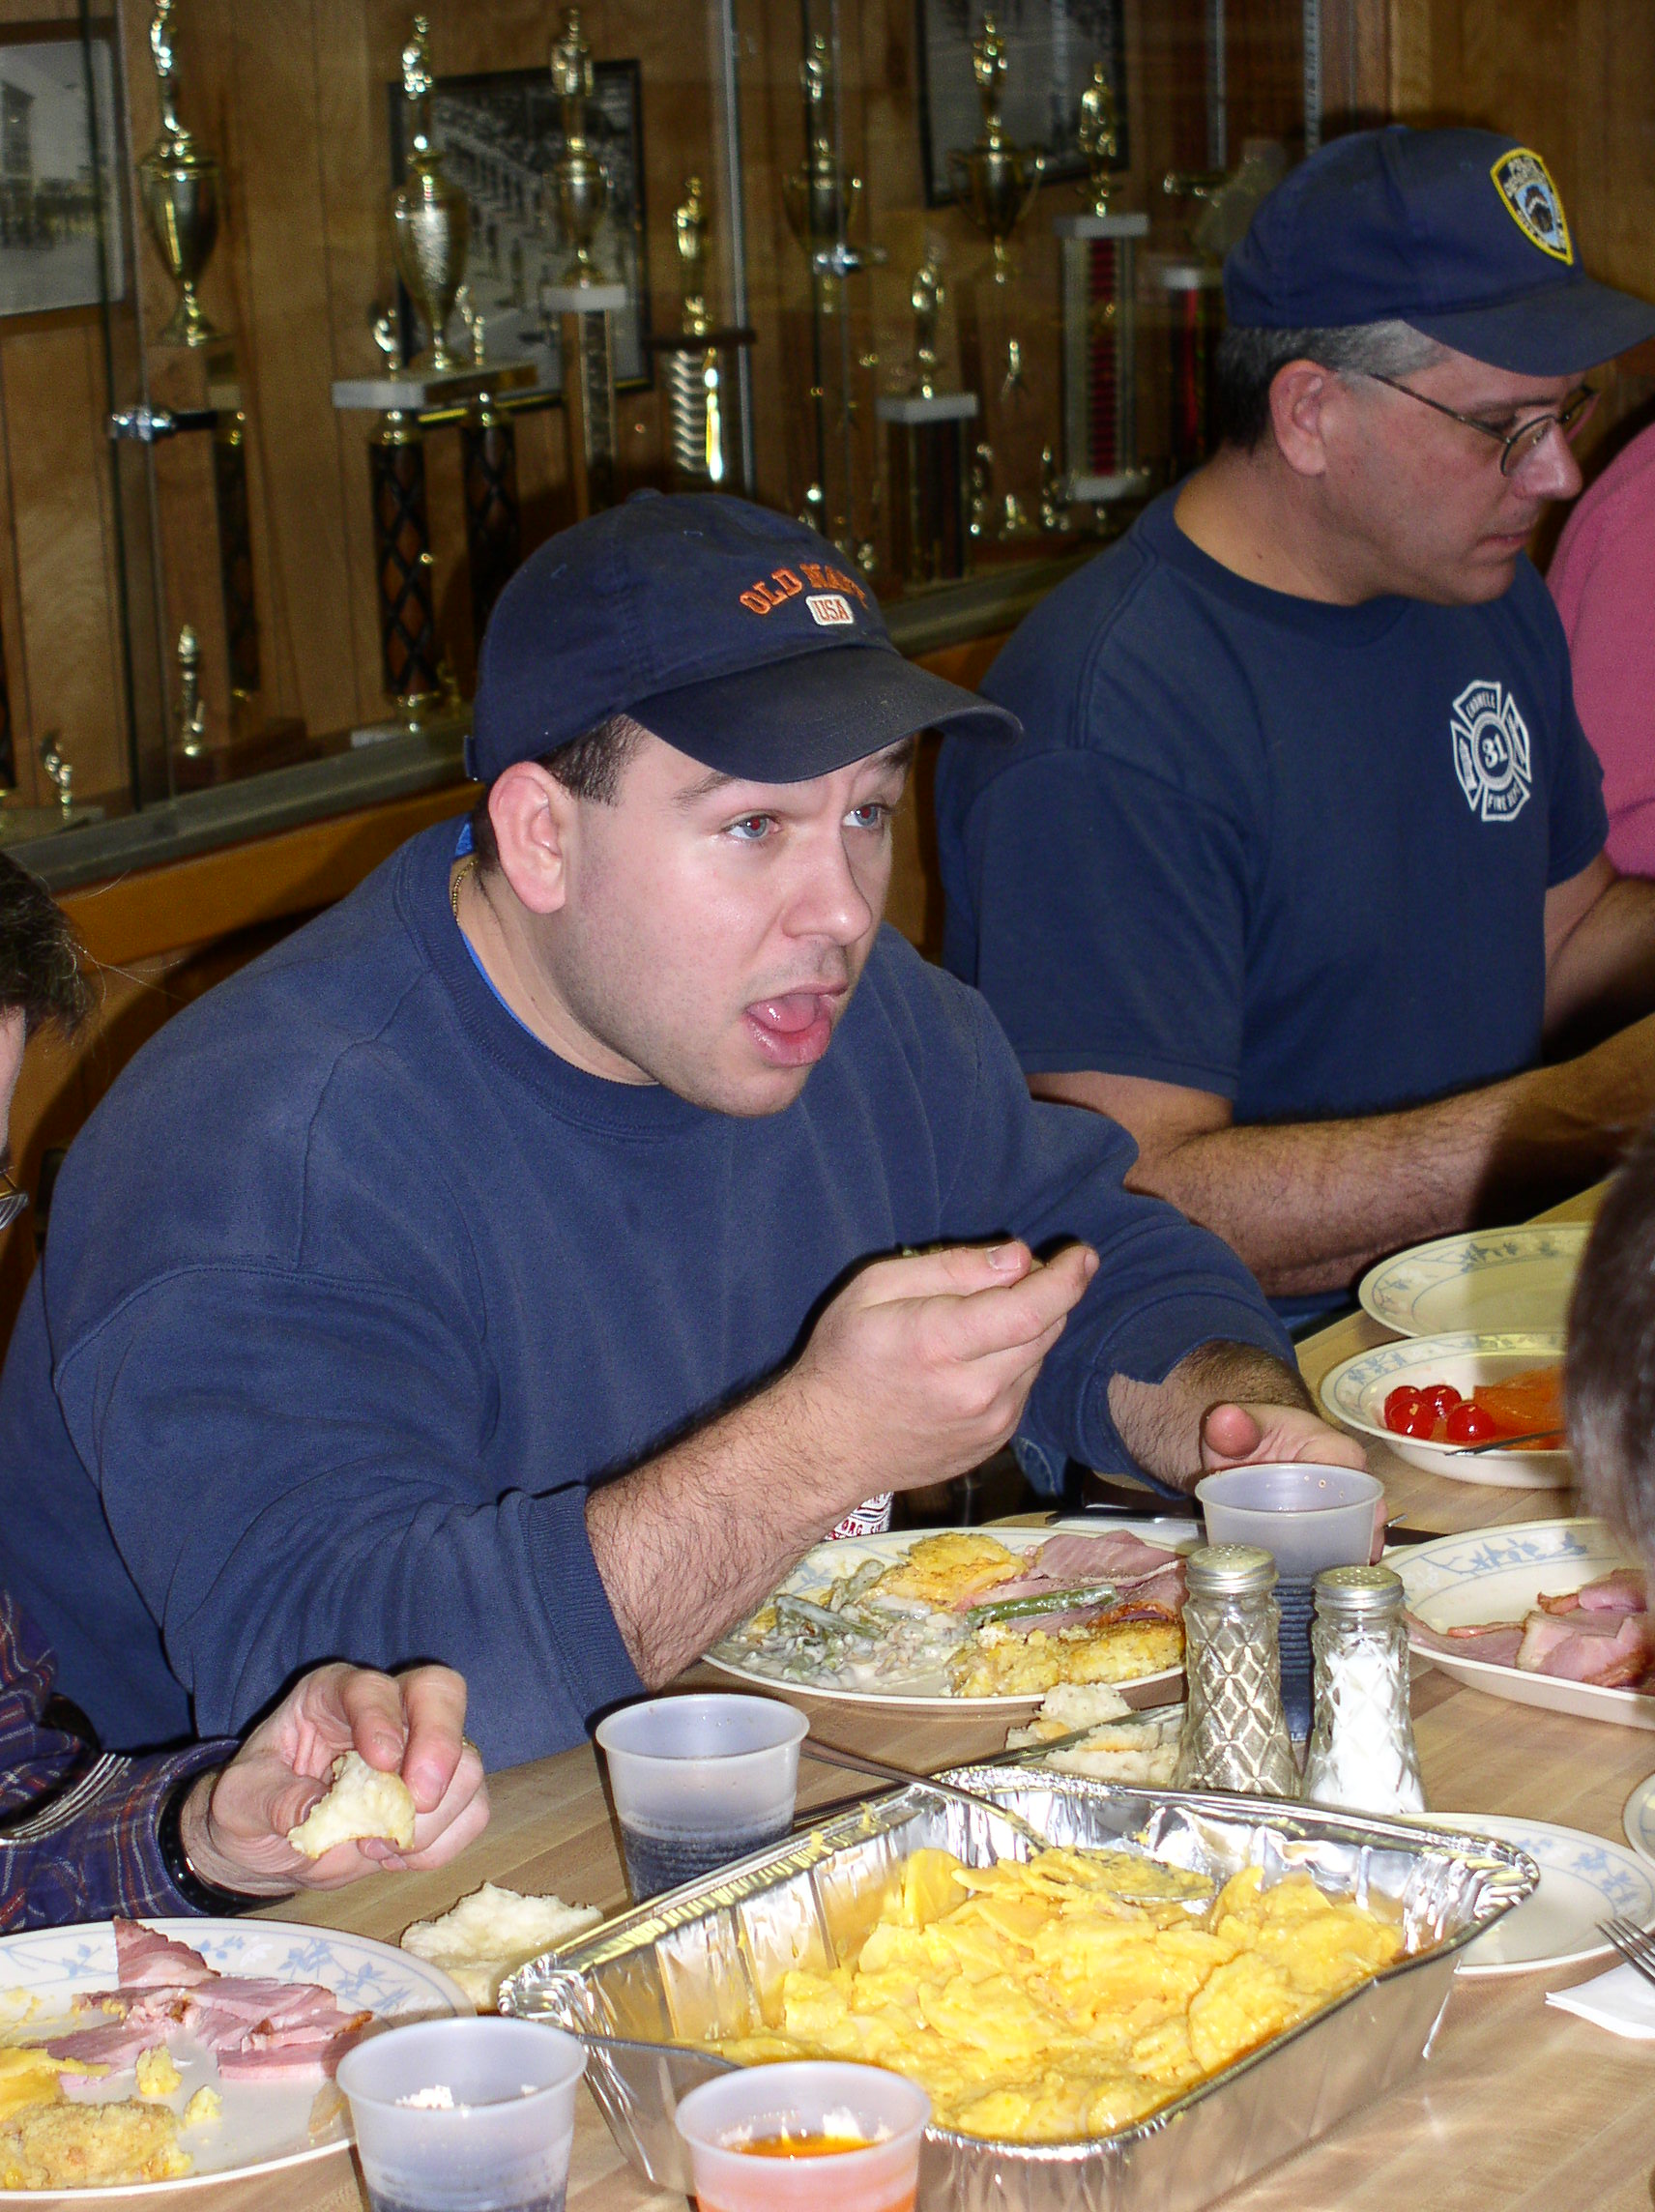 12-30-02  Other - Meal After Training